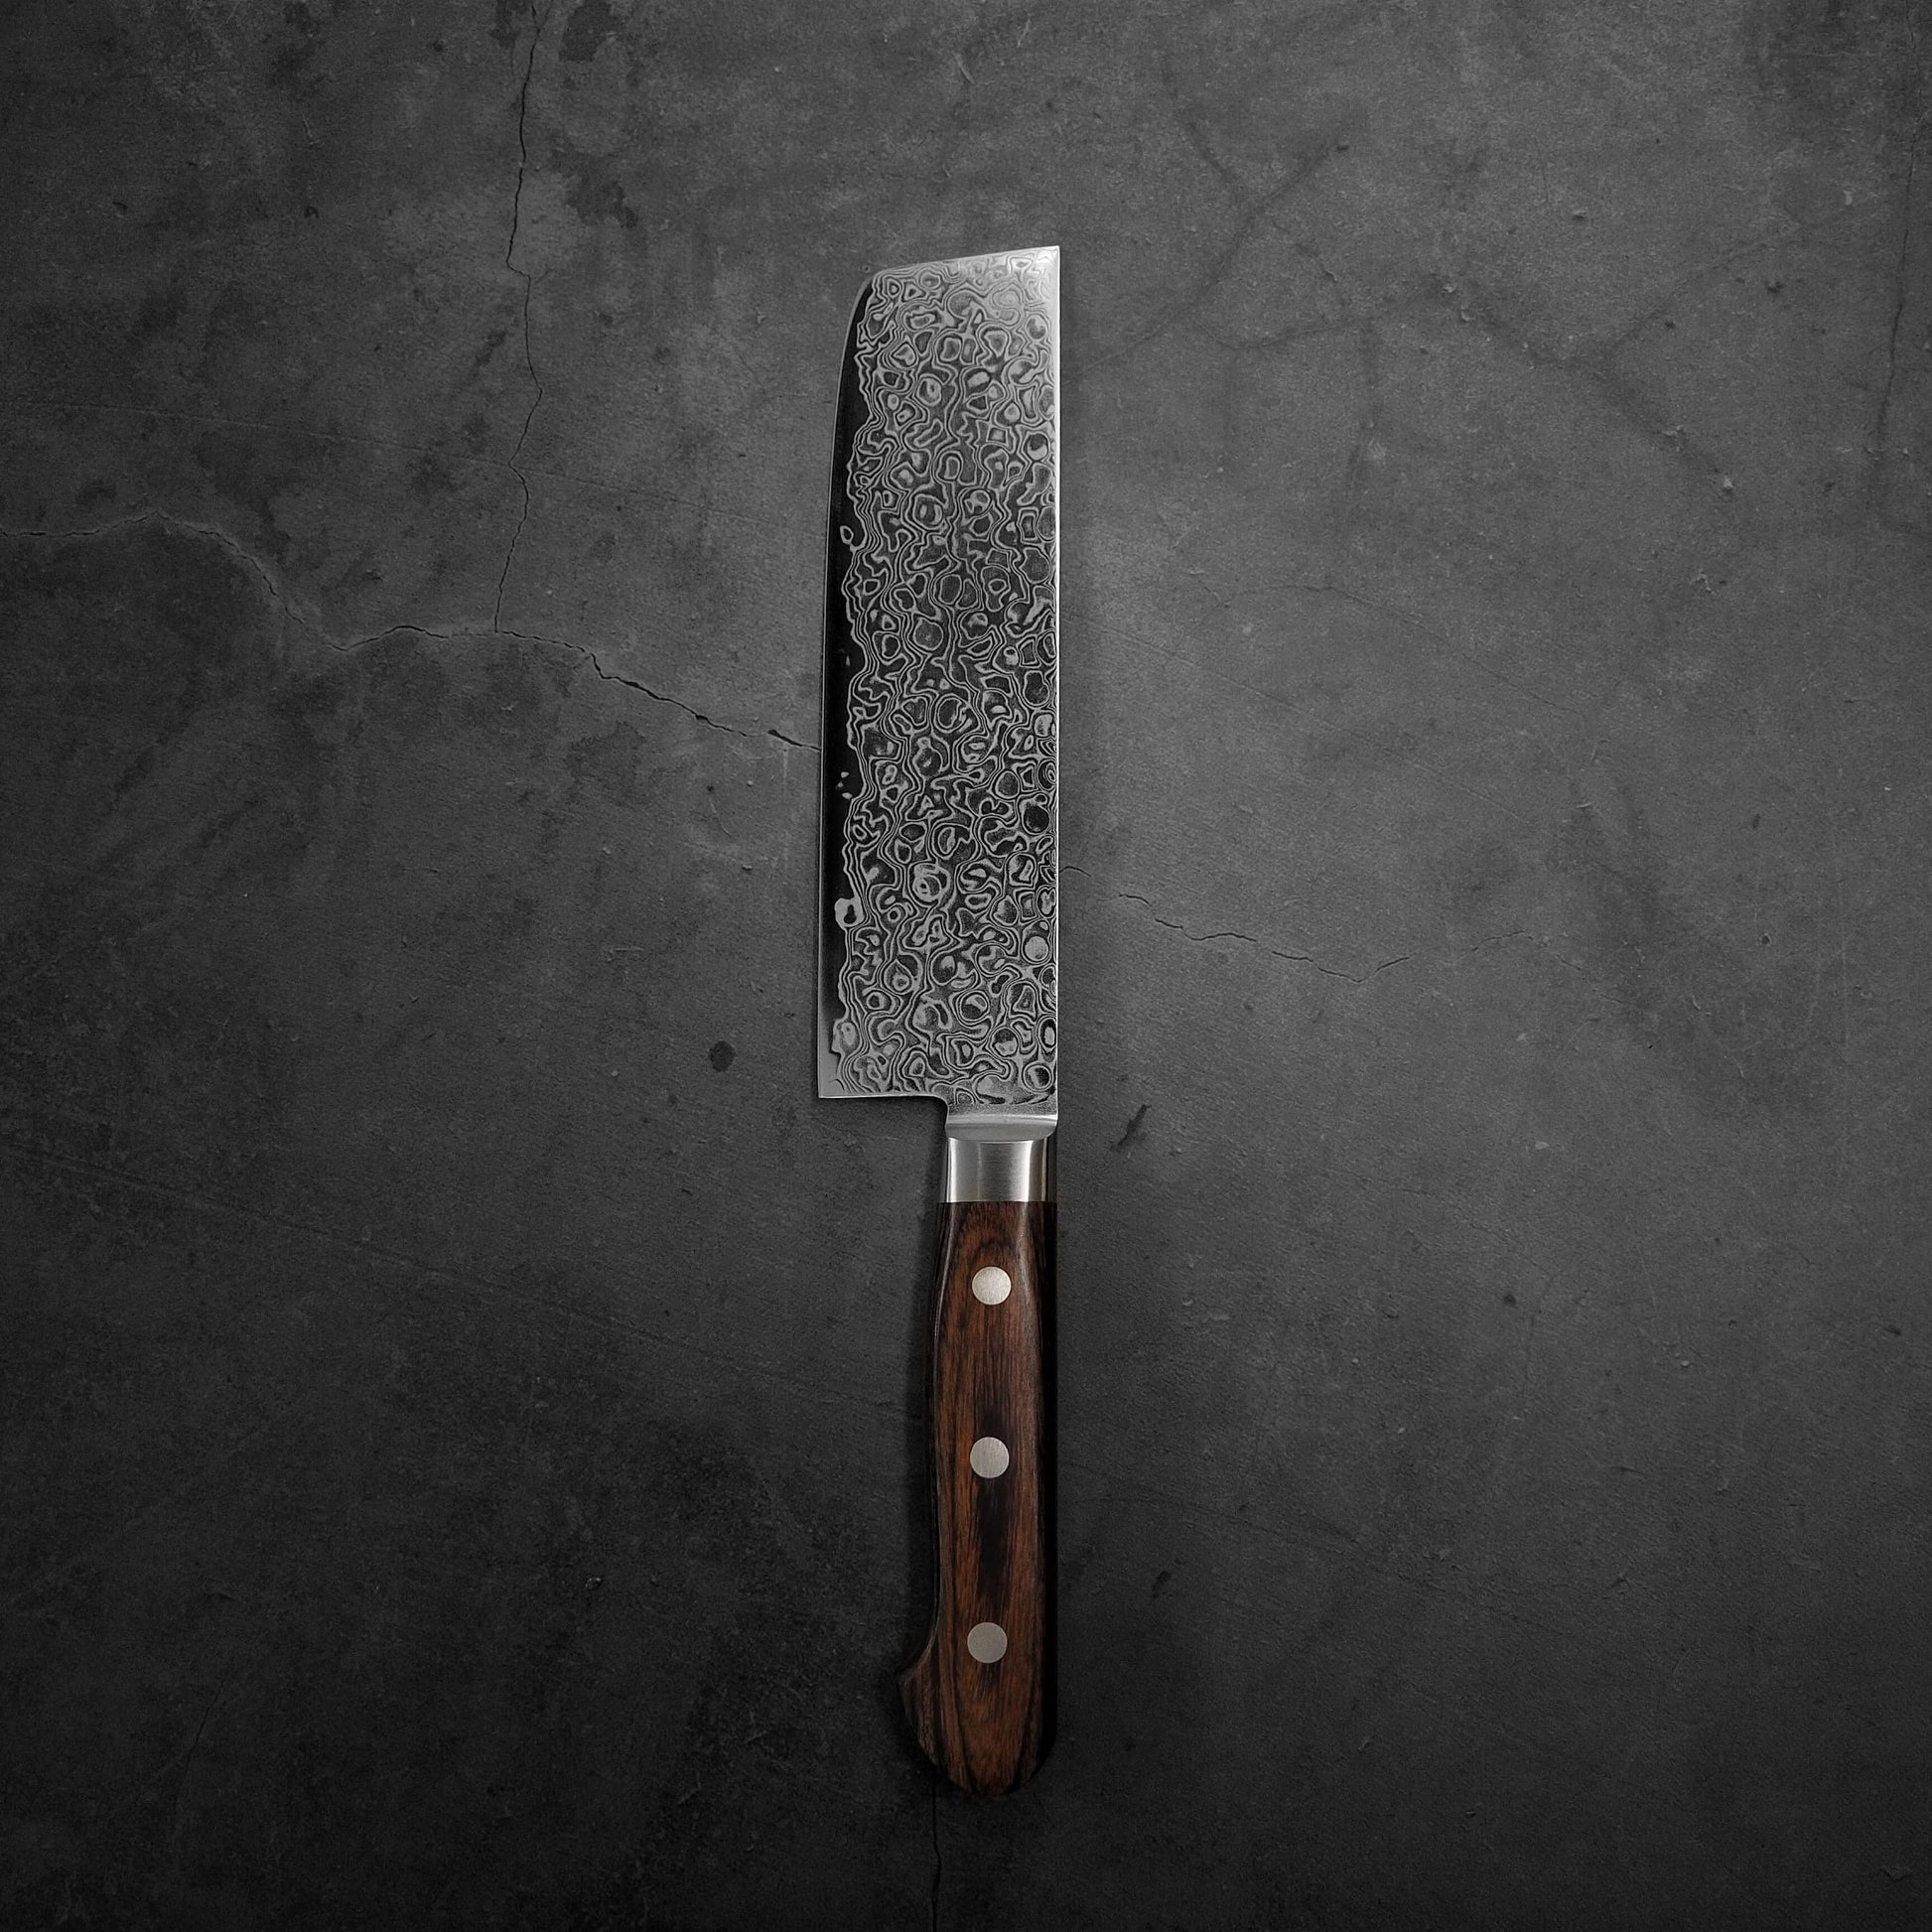 Top view of Tsunehisa ZA18 damascus nakiri knife. Image shows the left side of the blade